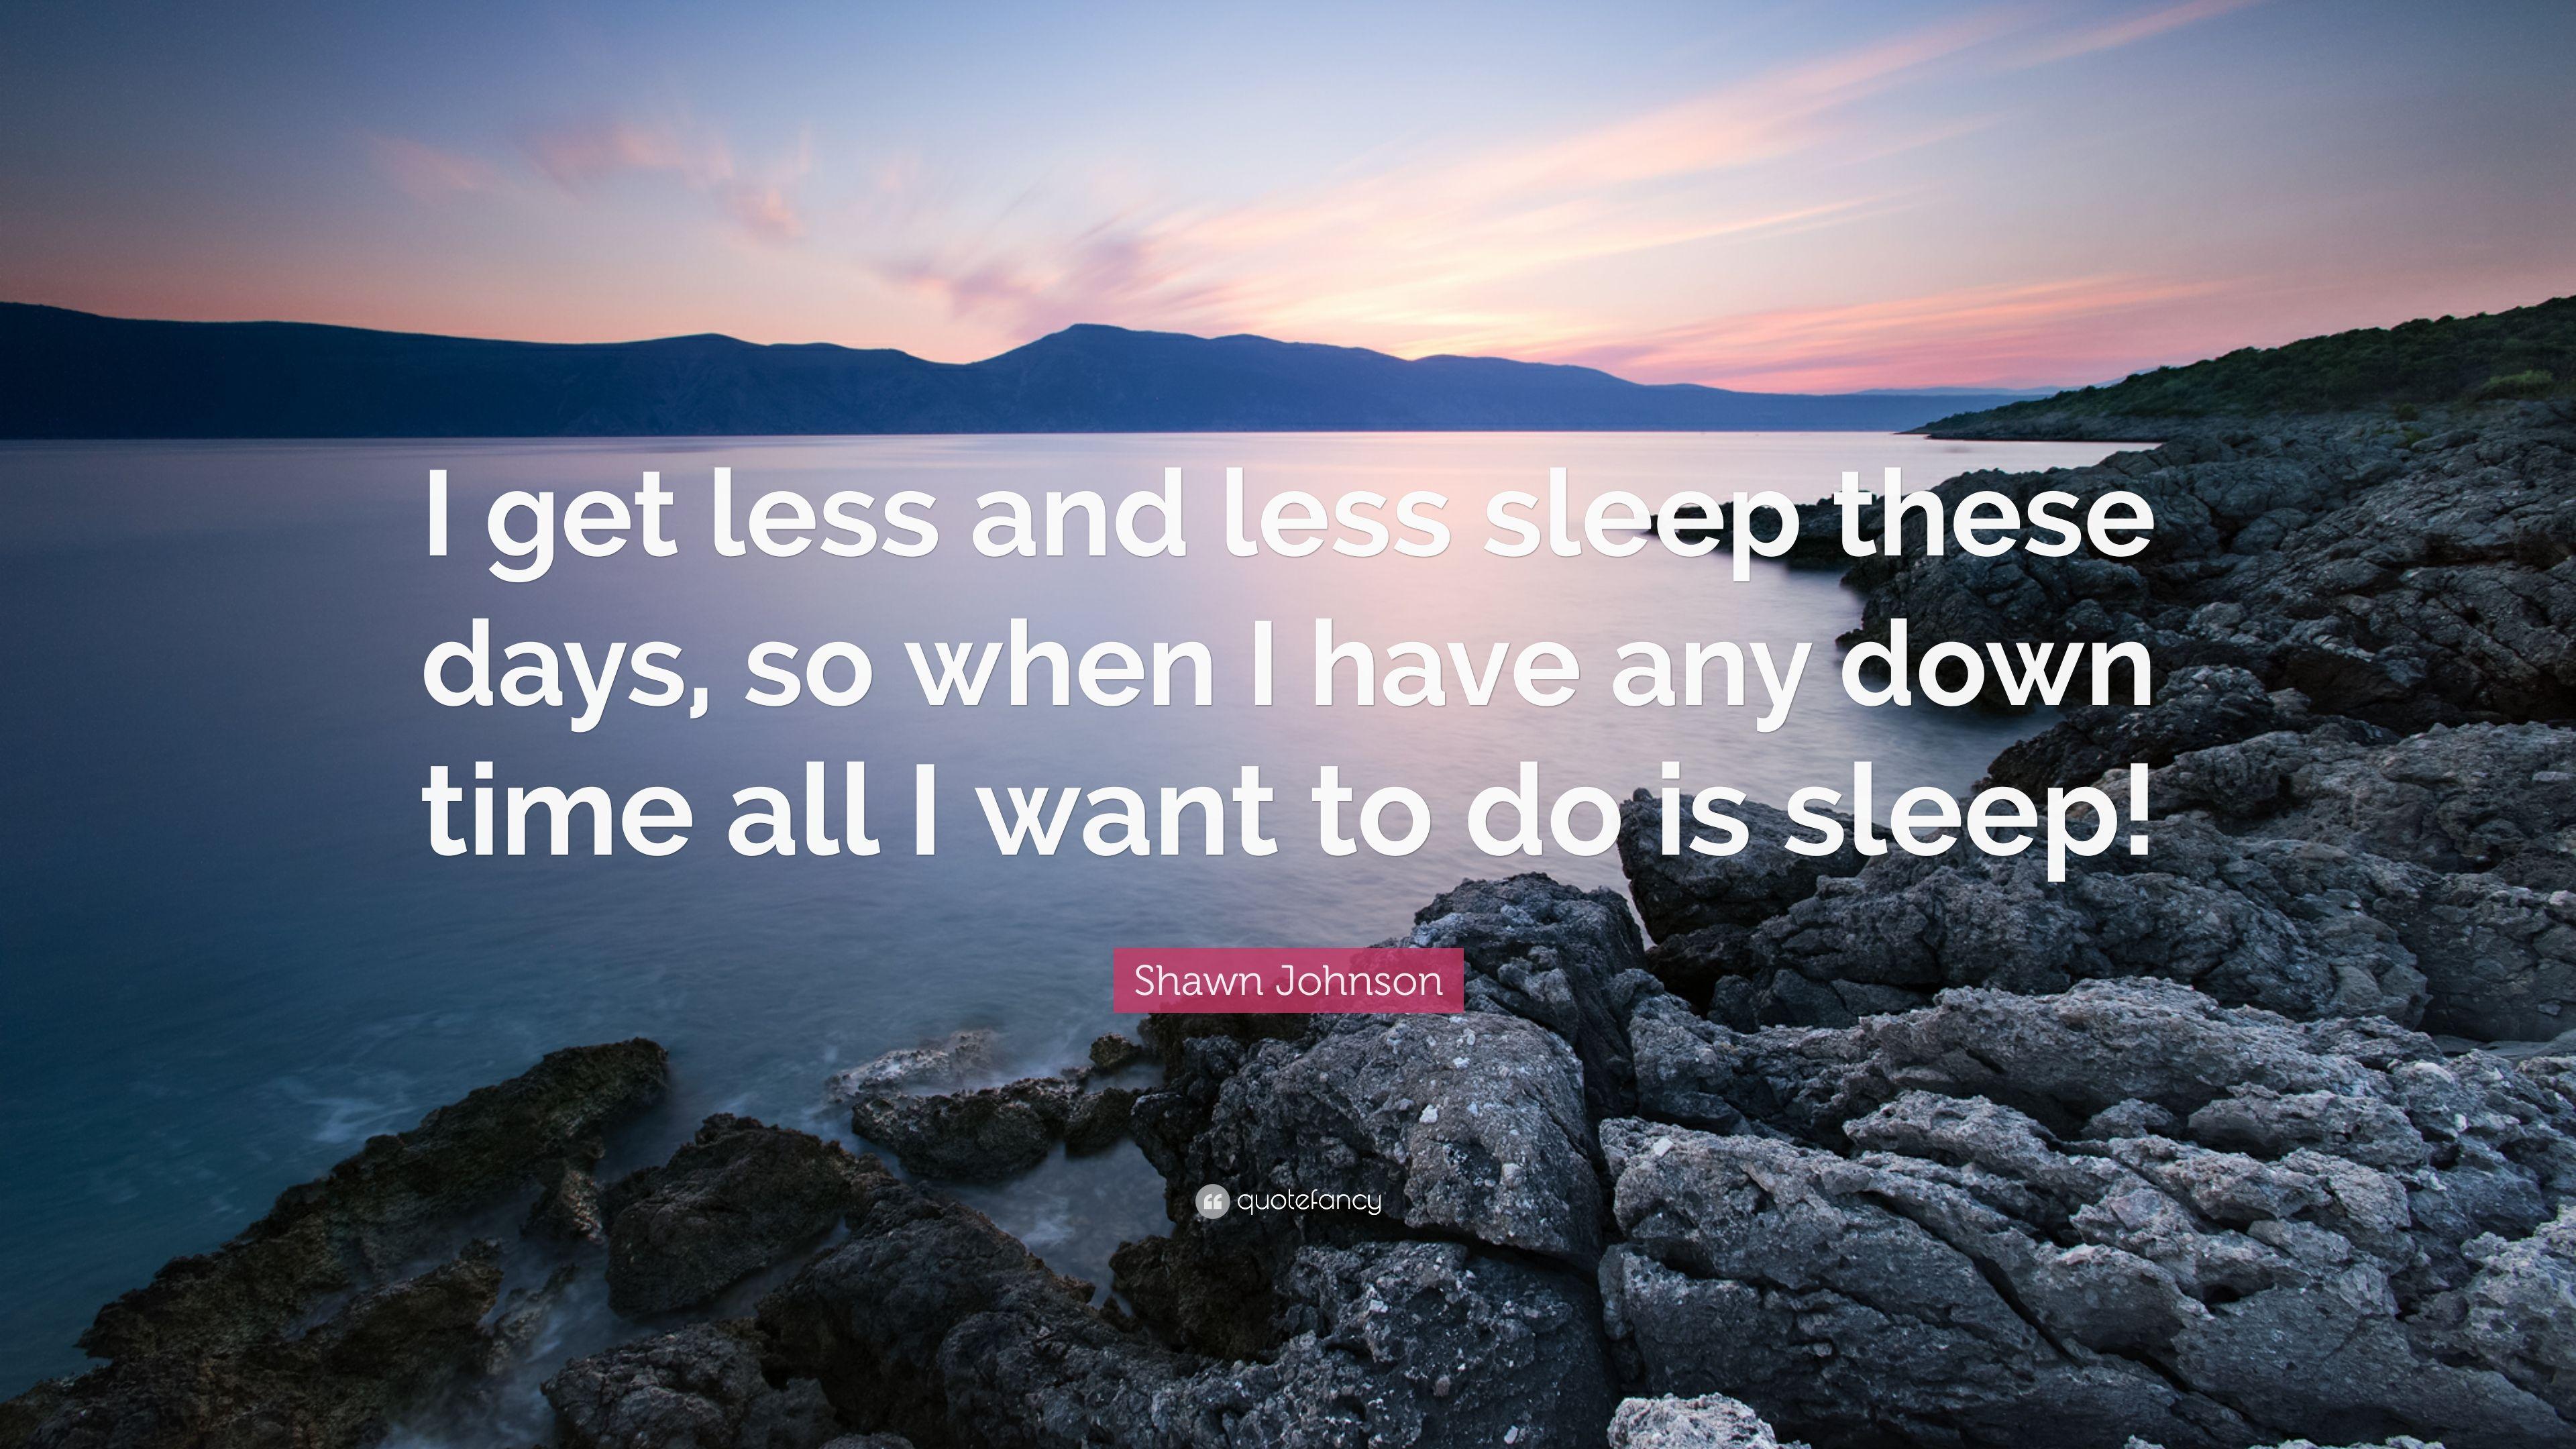 Shawn Johnson Quote: “I get less and less sleep these days, so